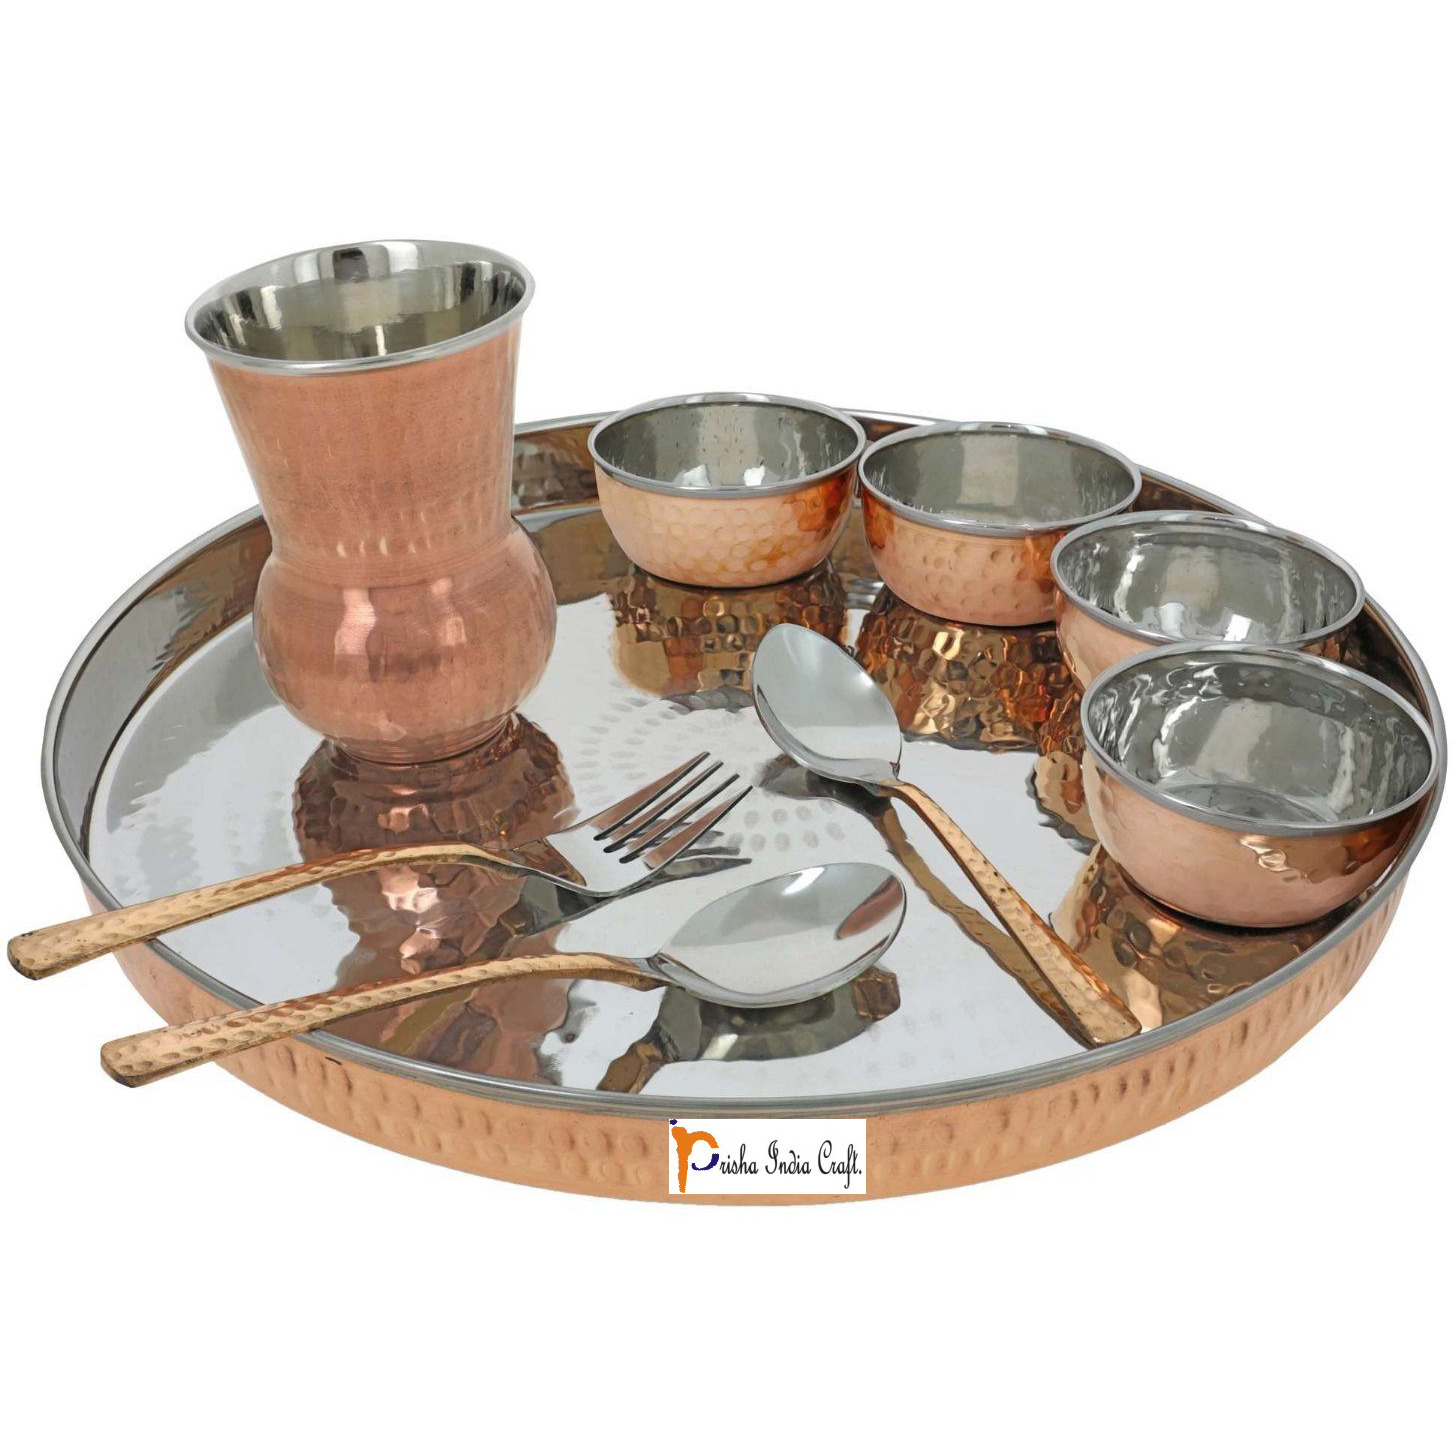 Prisha India Craft B. Dinnerware Traditional Stainless Steel Copper Dinner Set of Thali Plate, Bowls, Glass and Spoons, Dia 13  With 1 Pure Copper Pitcher Jug - Christmas Gift